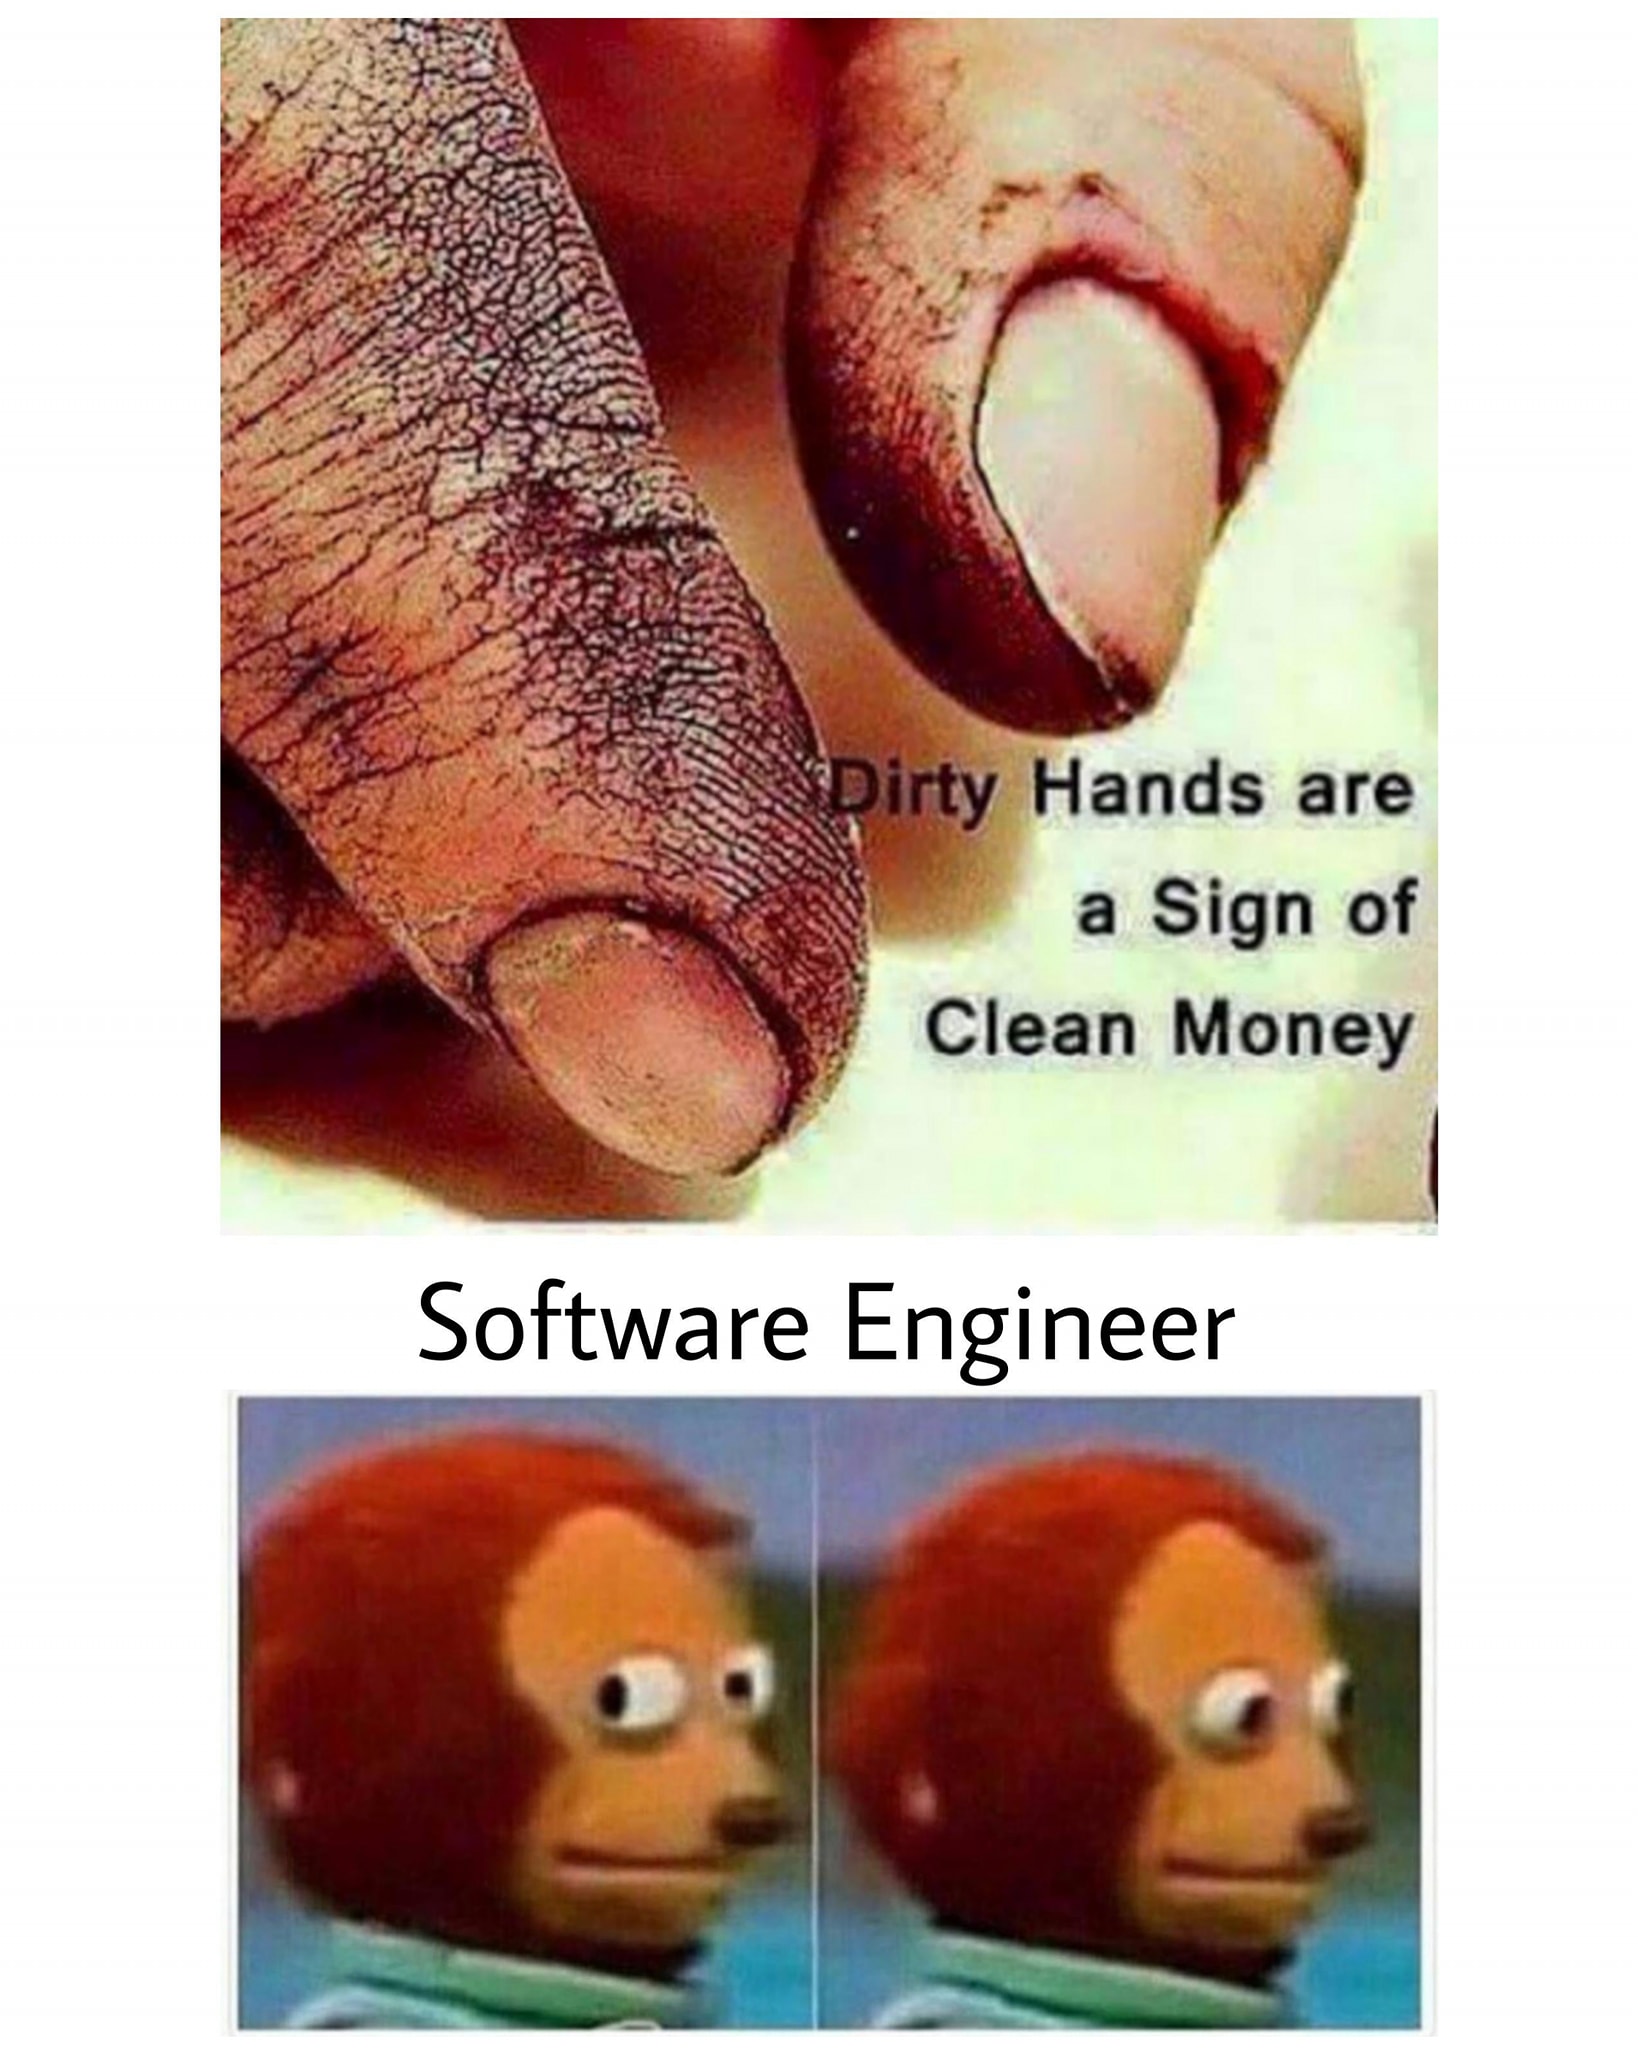 dirty_hands_are_sign_of_clean_money.jpg